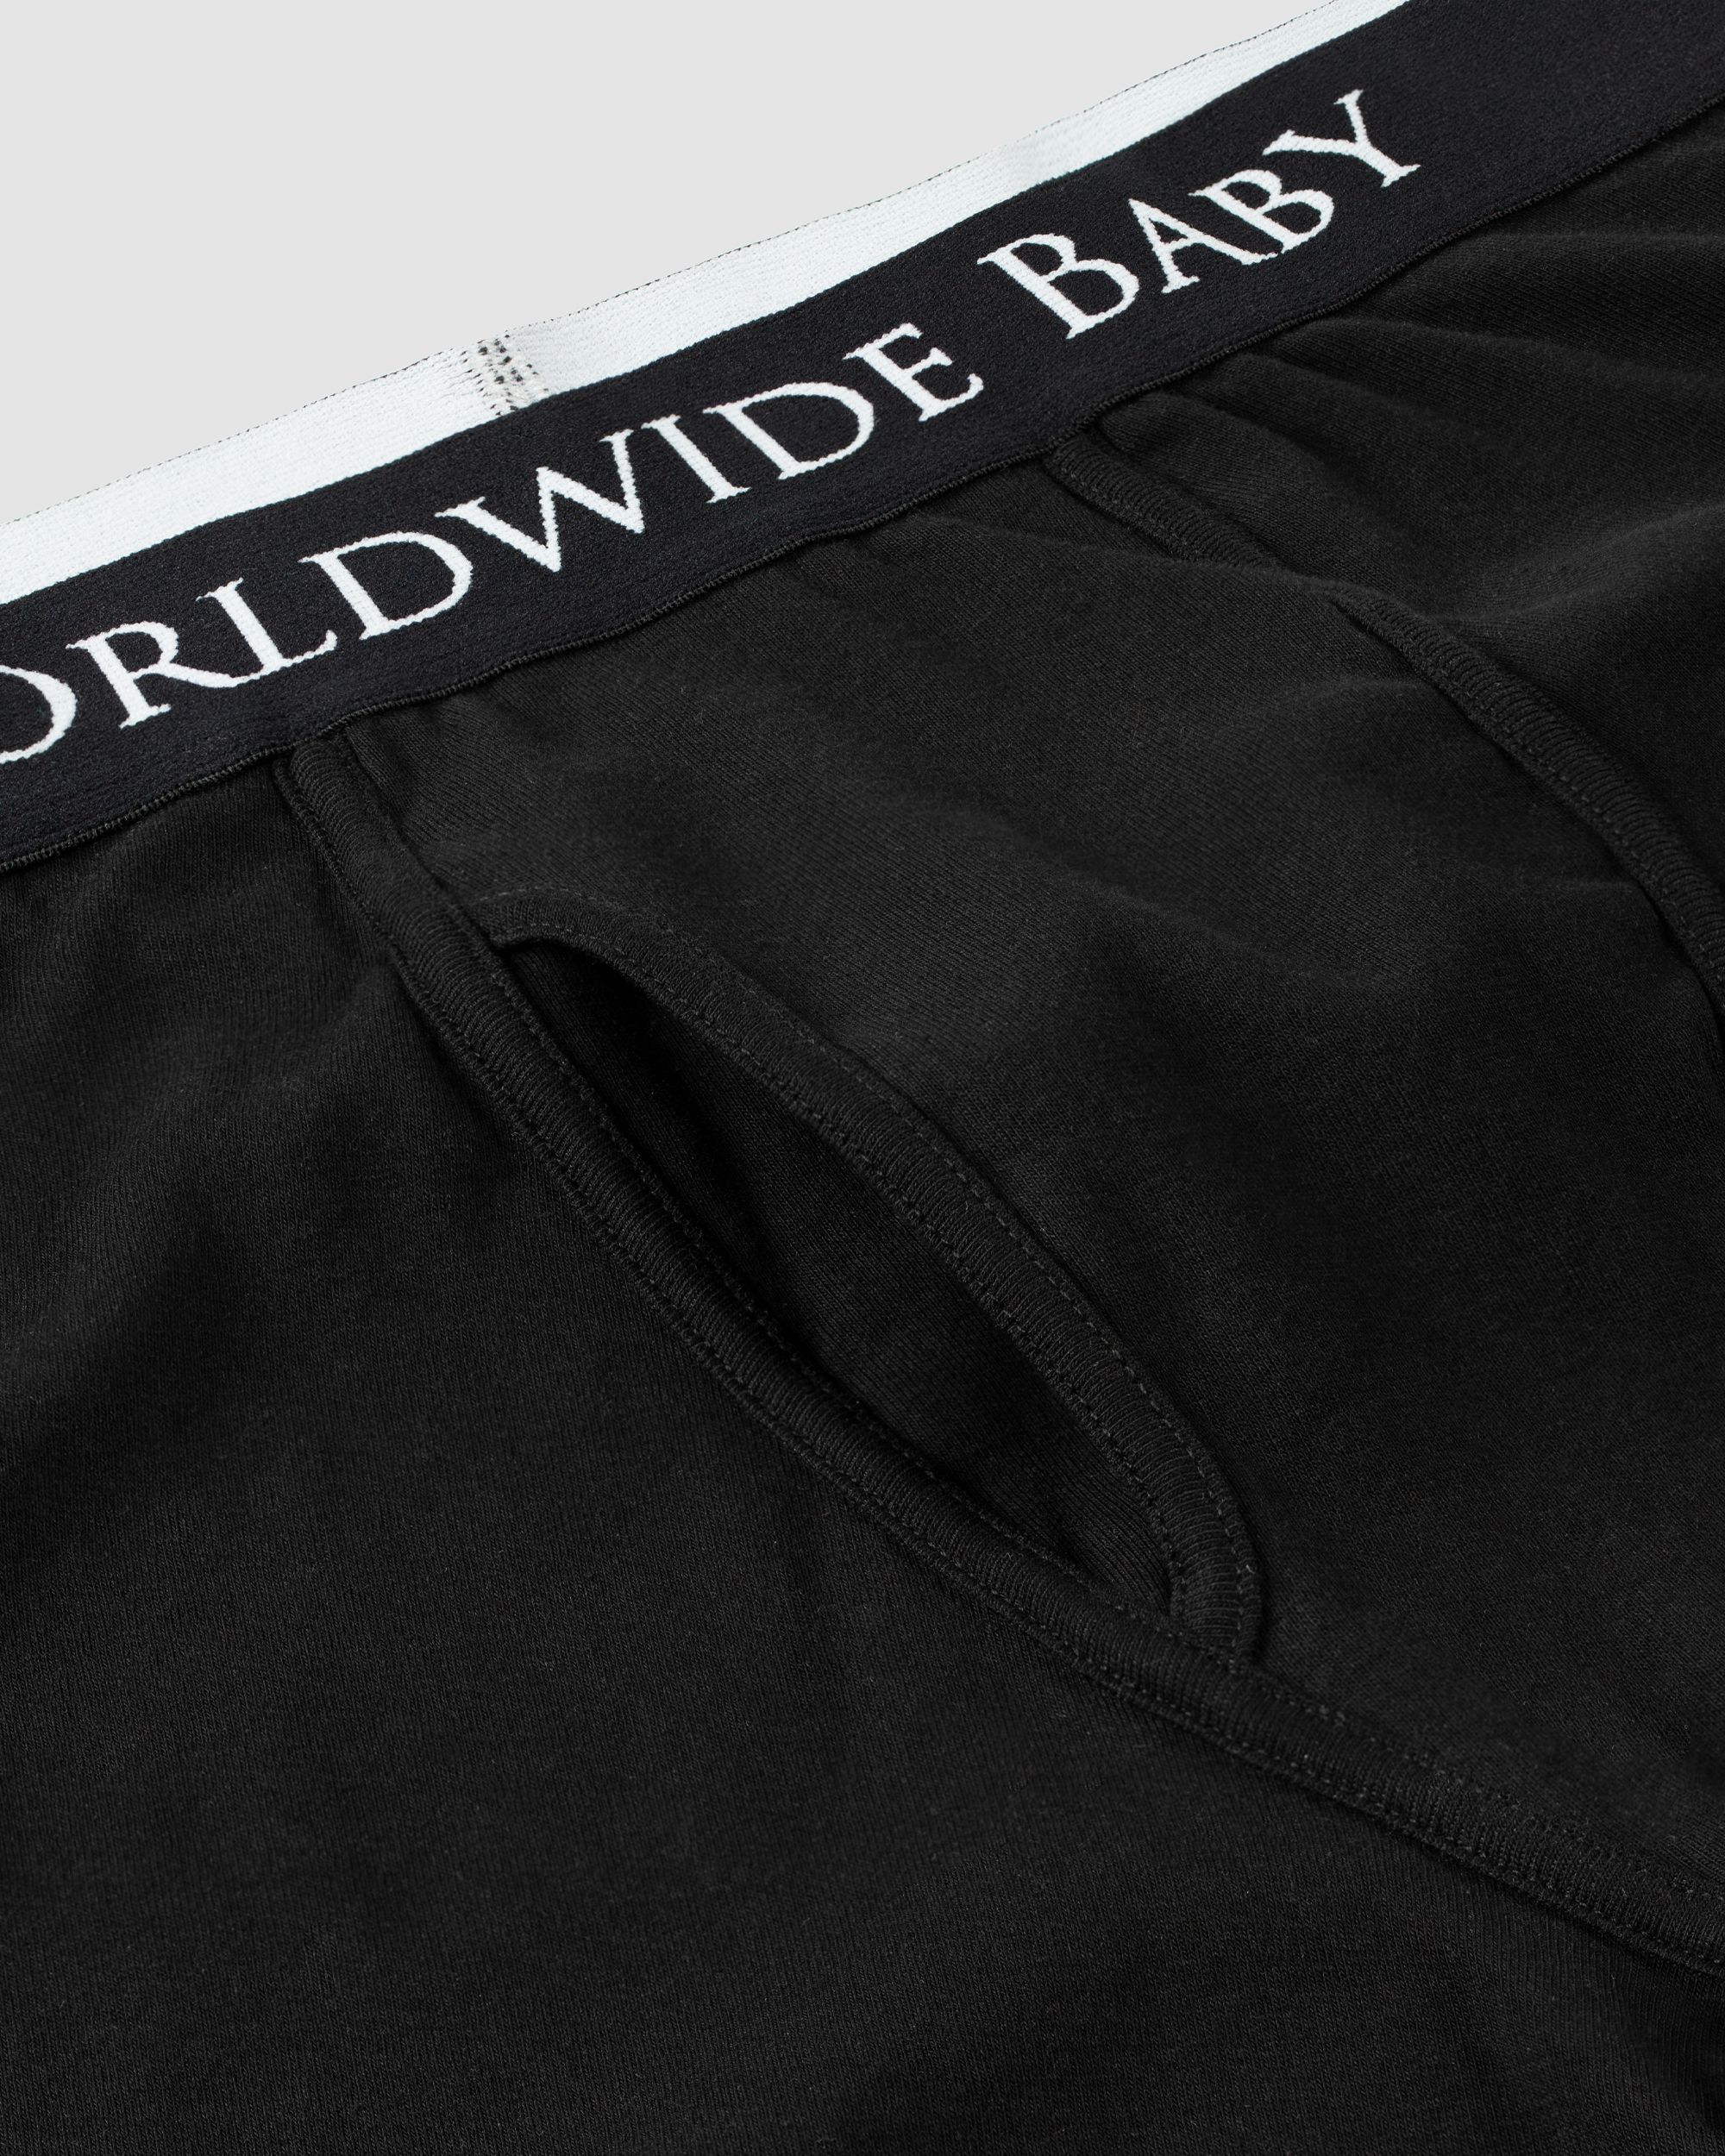 world wide baby boxers